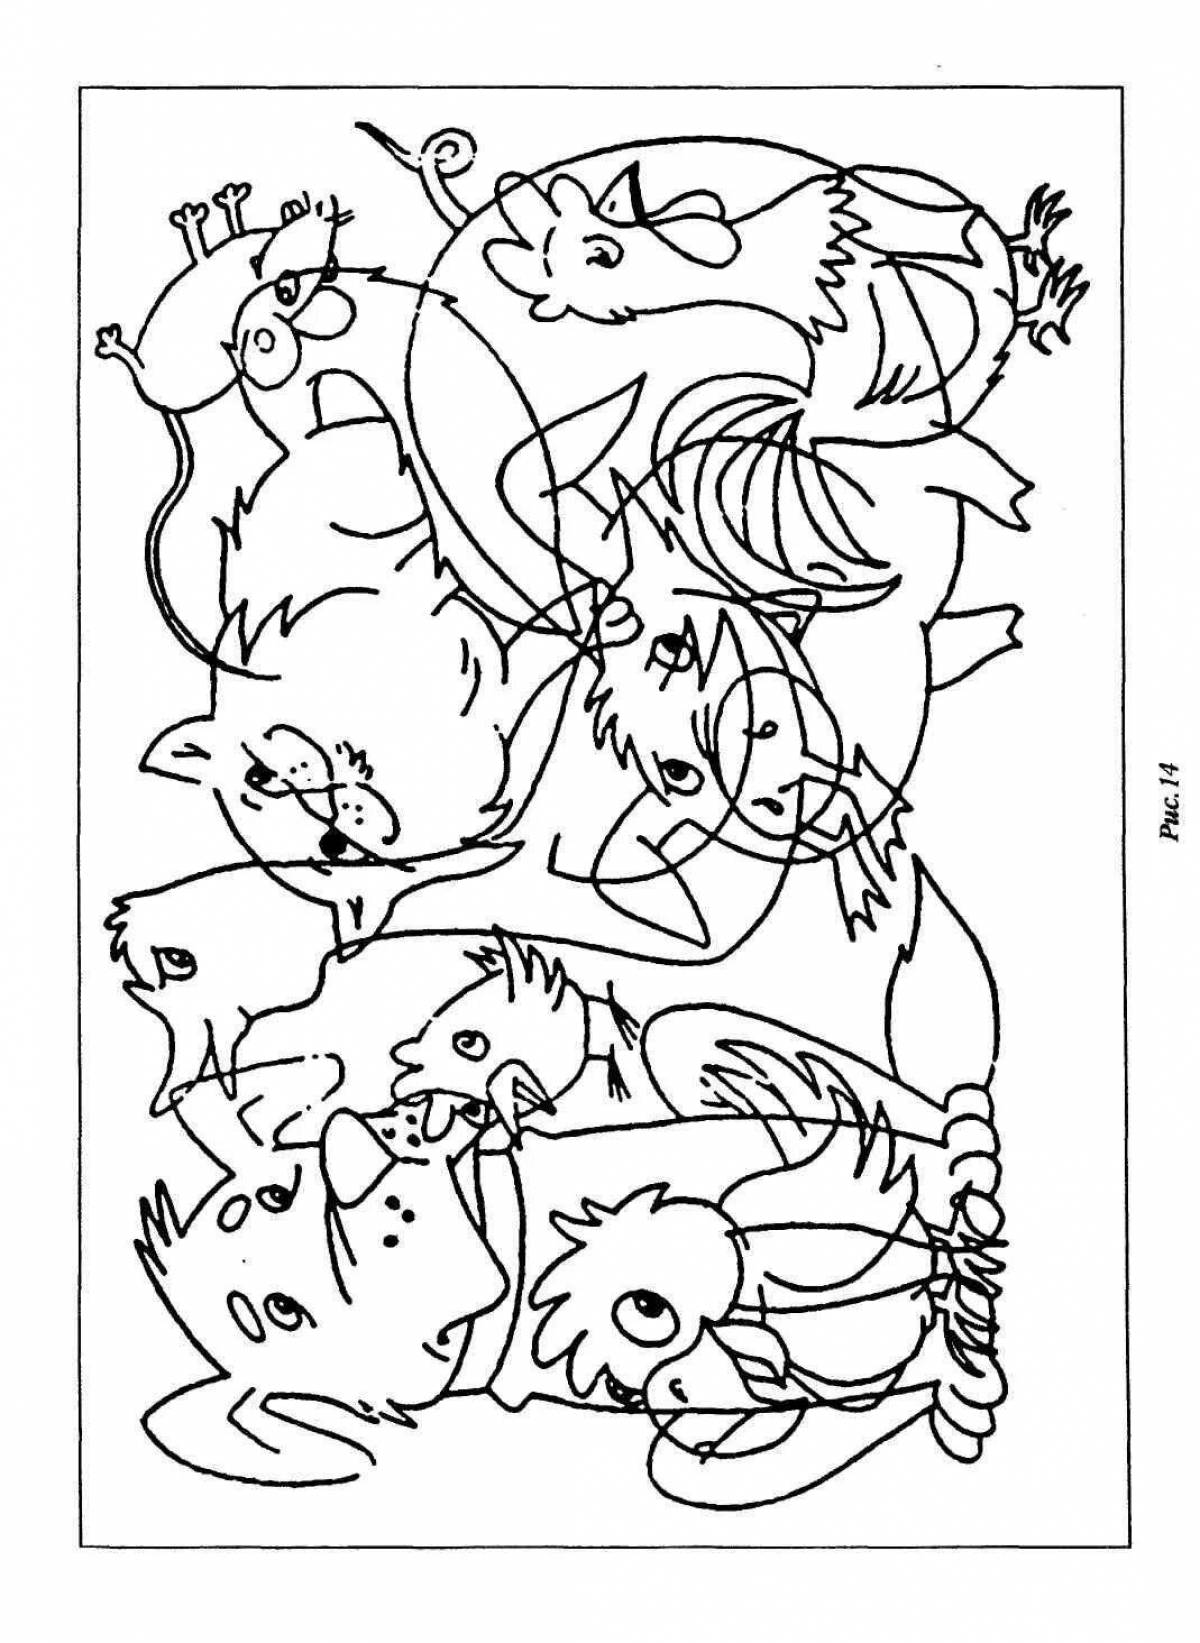 Find the animals wonderful coloring book